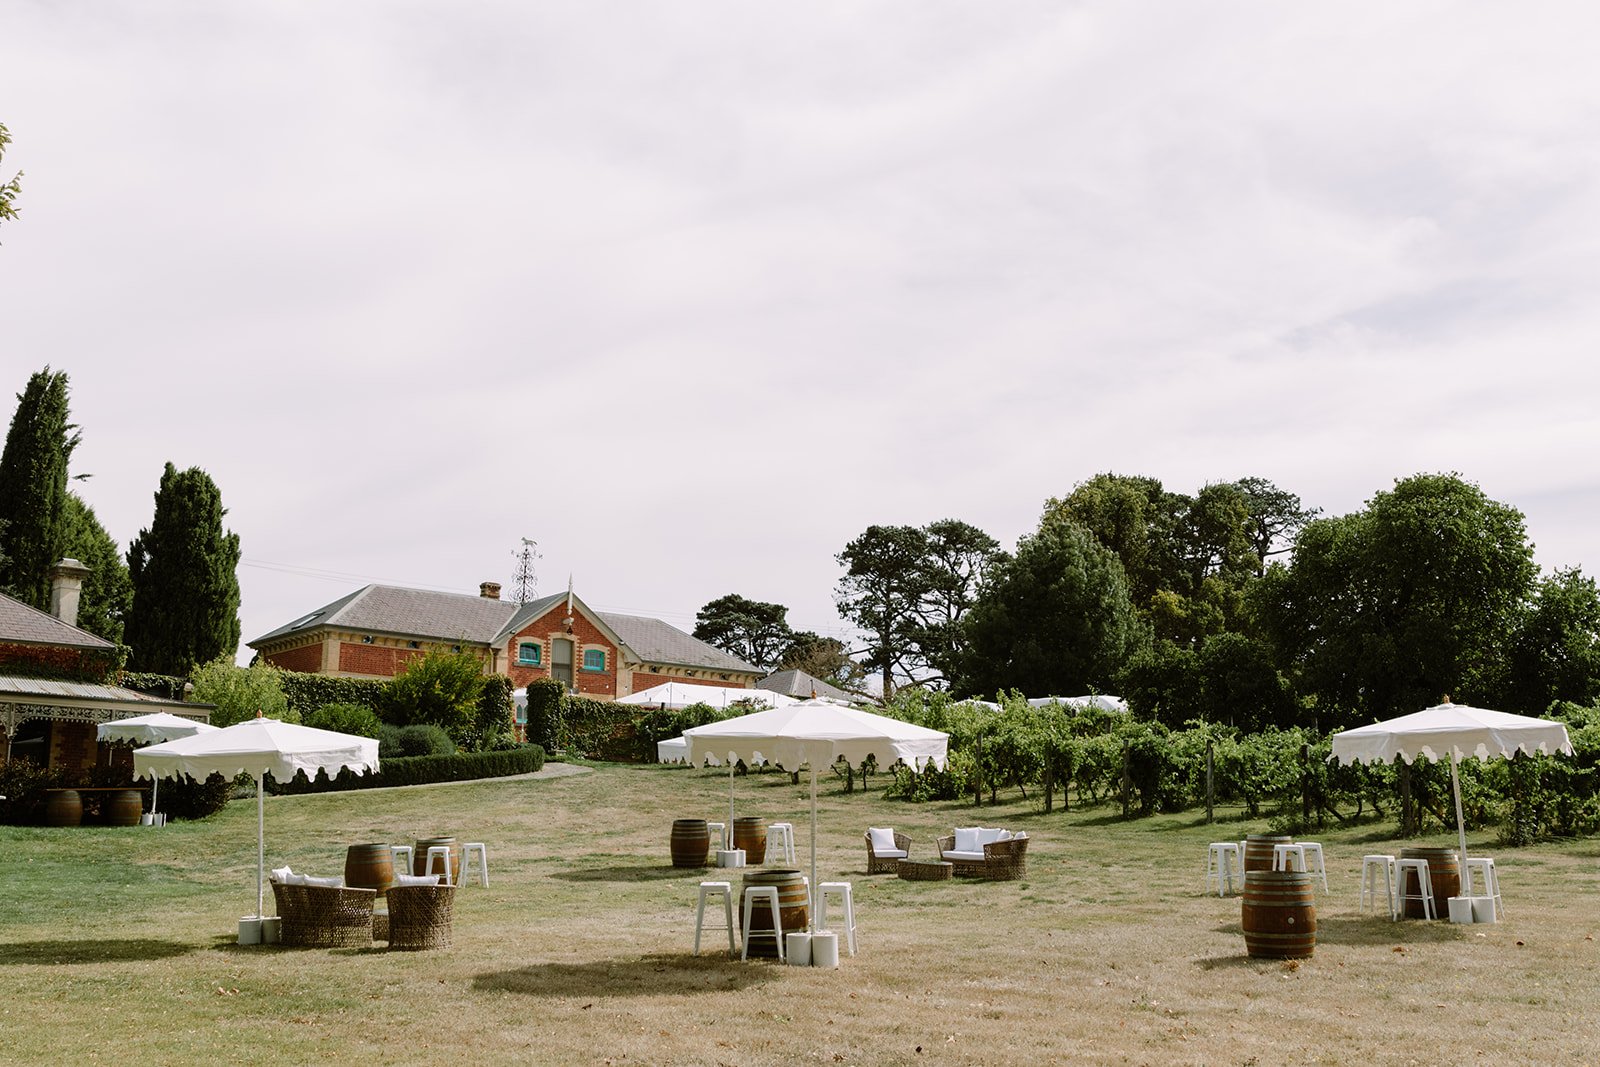 Grape vines sit to the right of a a grassy area, where tables have been set up, using old wine barrels, white stools and white scalloped umbrellas. In the background St Agnes Homestead looks over the area. This was the setting of the cocktail hour for a wedding curated by Coral & Co.